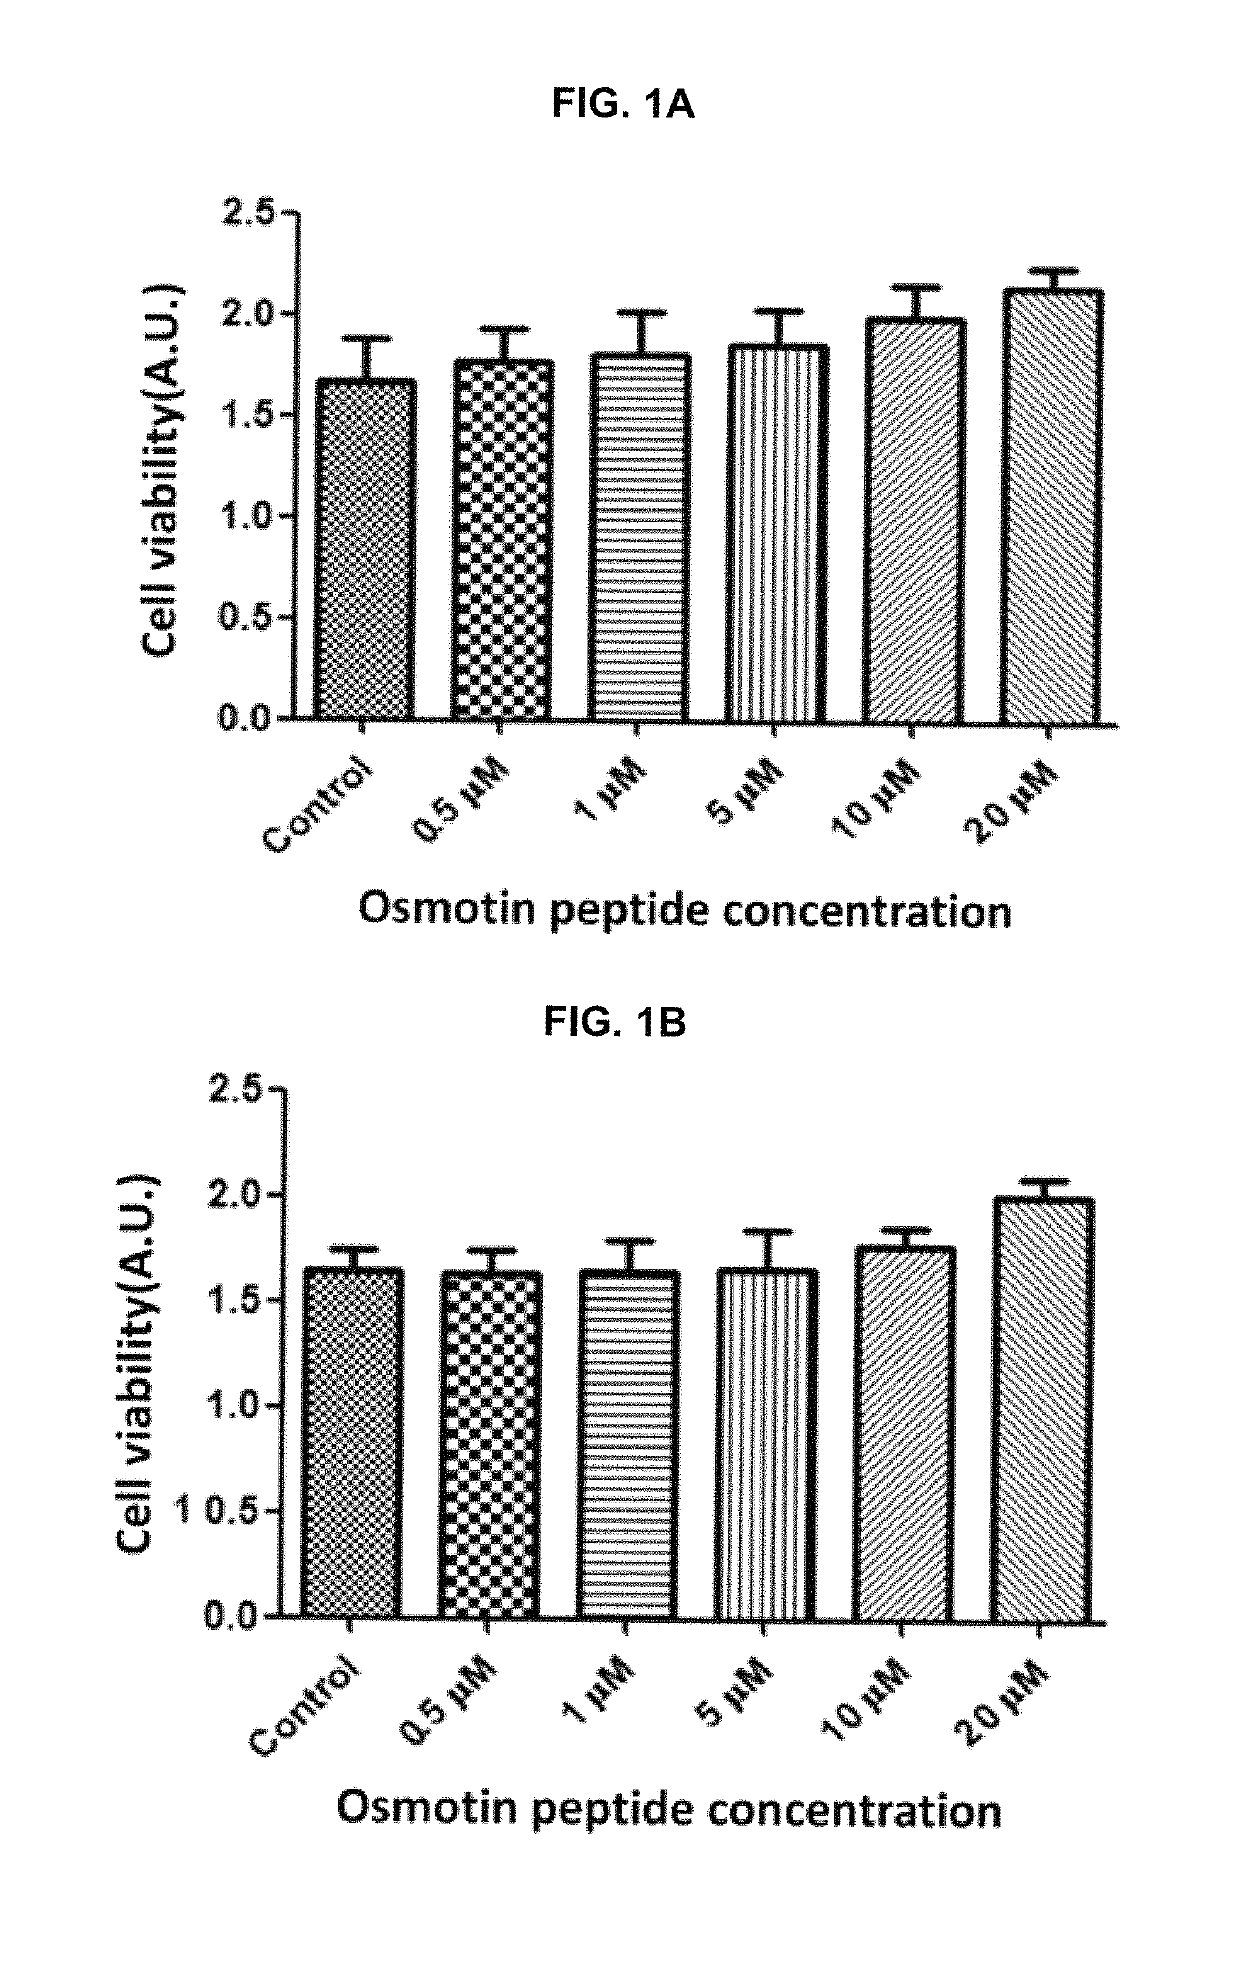 Composition for preventing, ameliorating, or treating neurological disease containing osmotin peptide as active ingredient